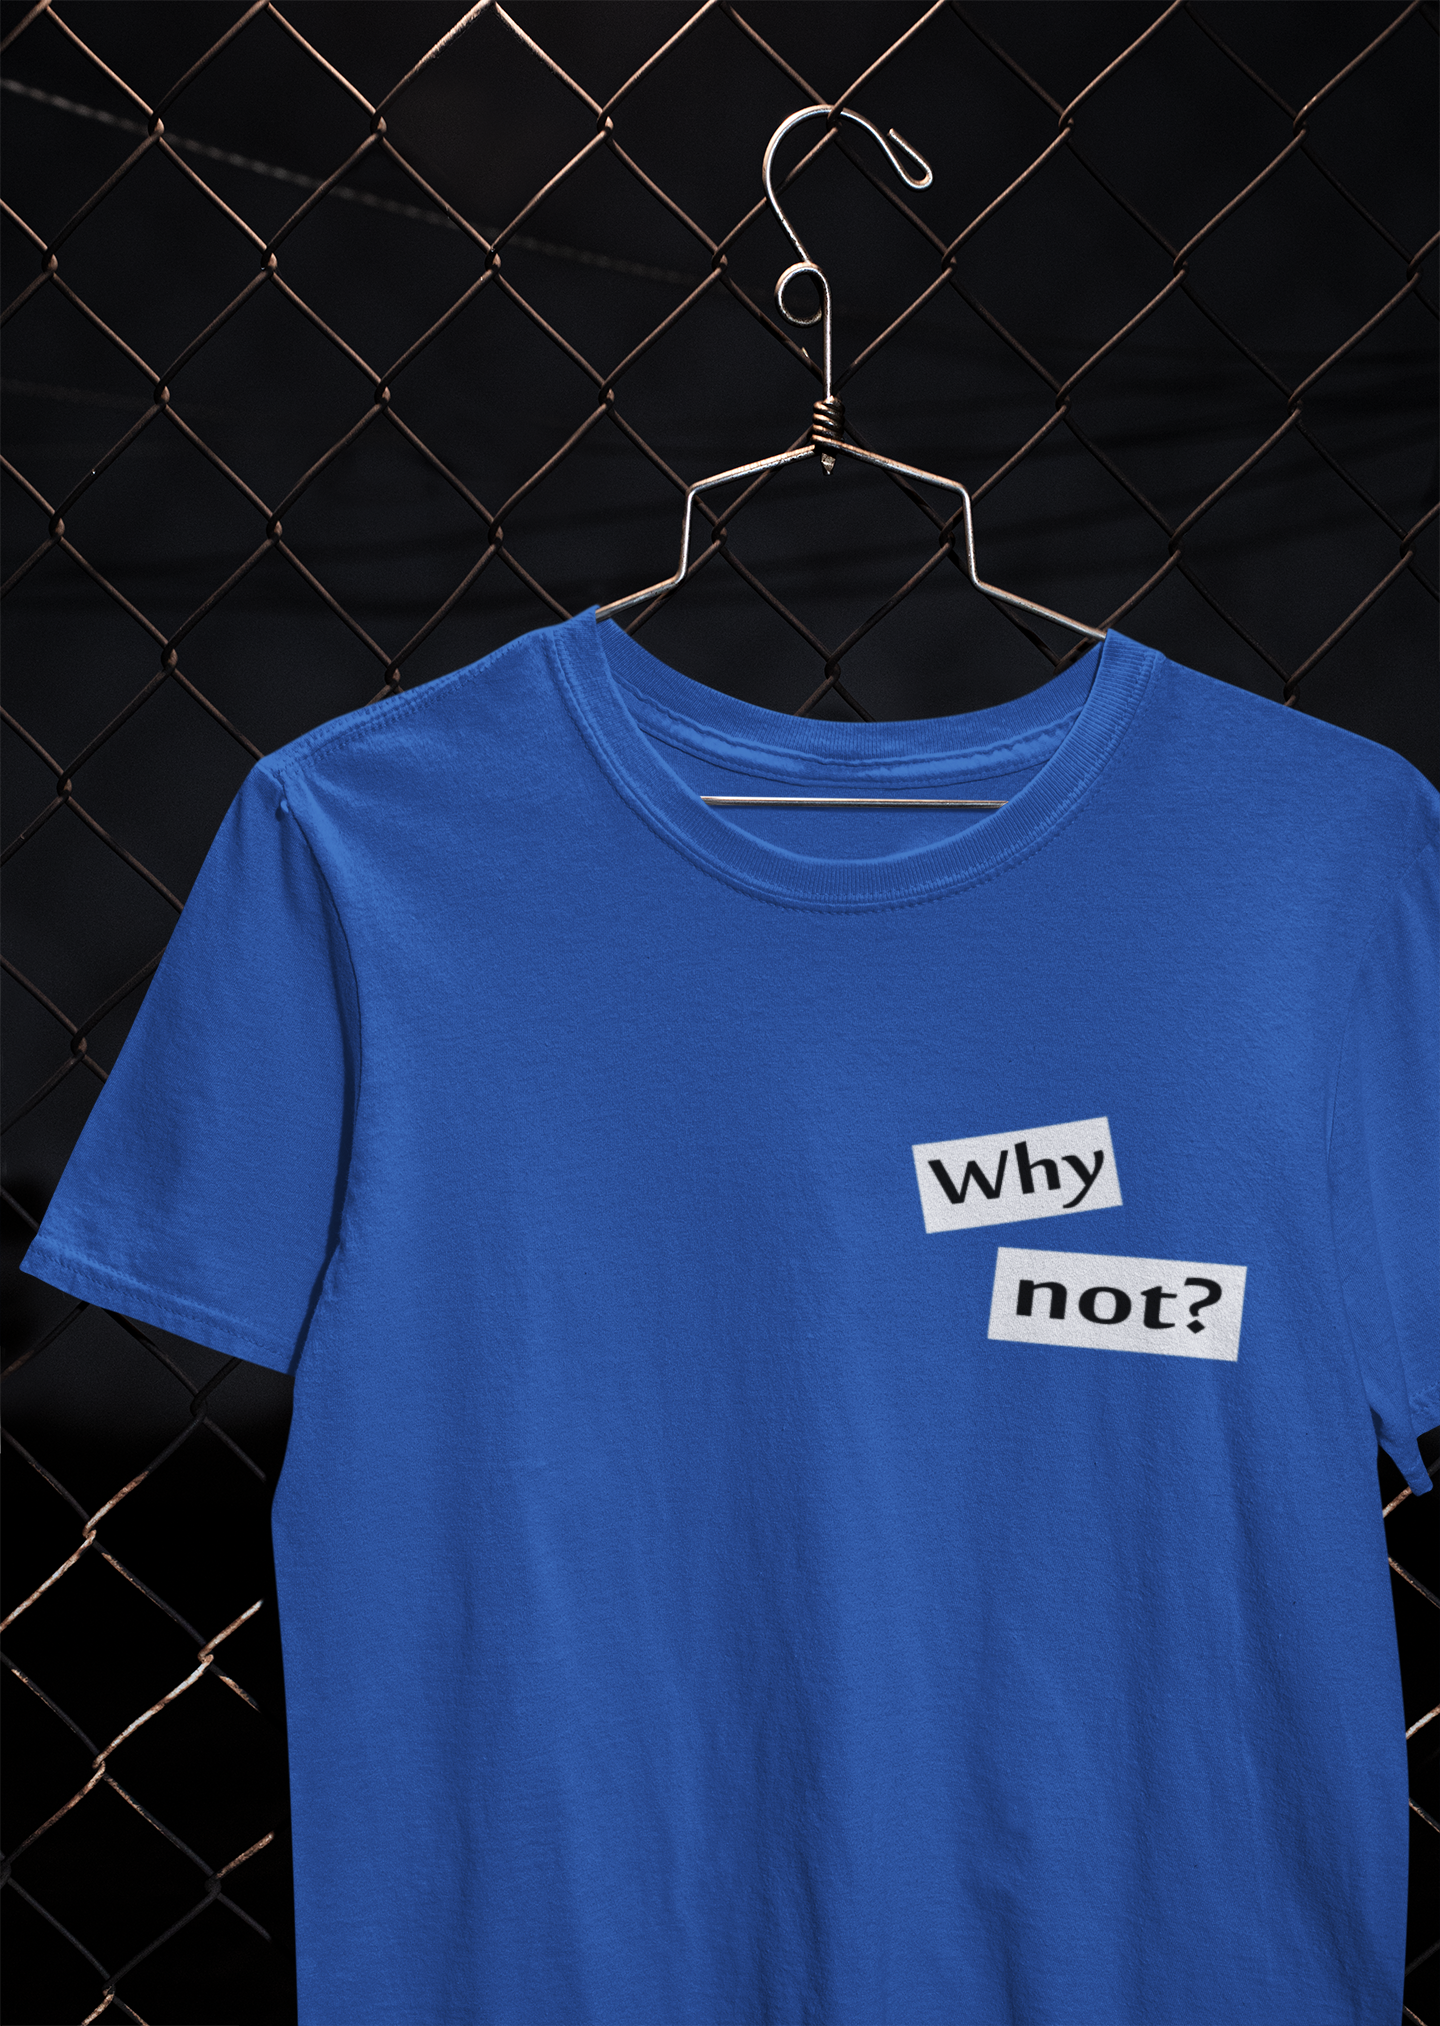 Why Not Quotes Mens Half Sleeves T-shirt- FunkyTeesClub